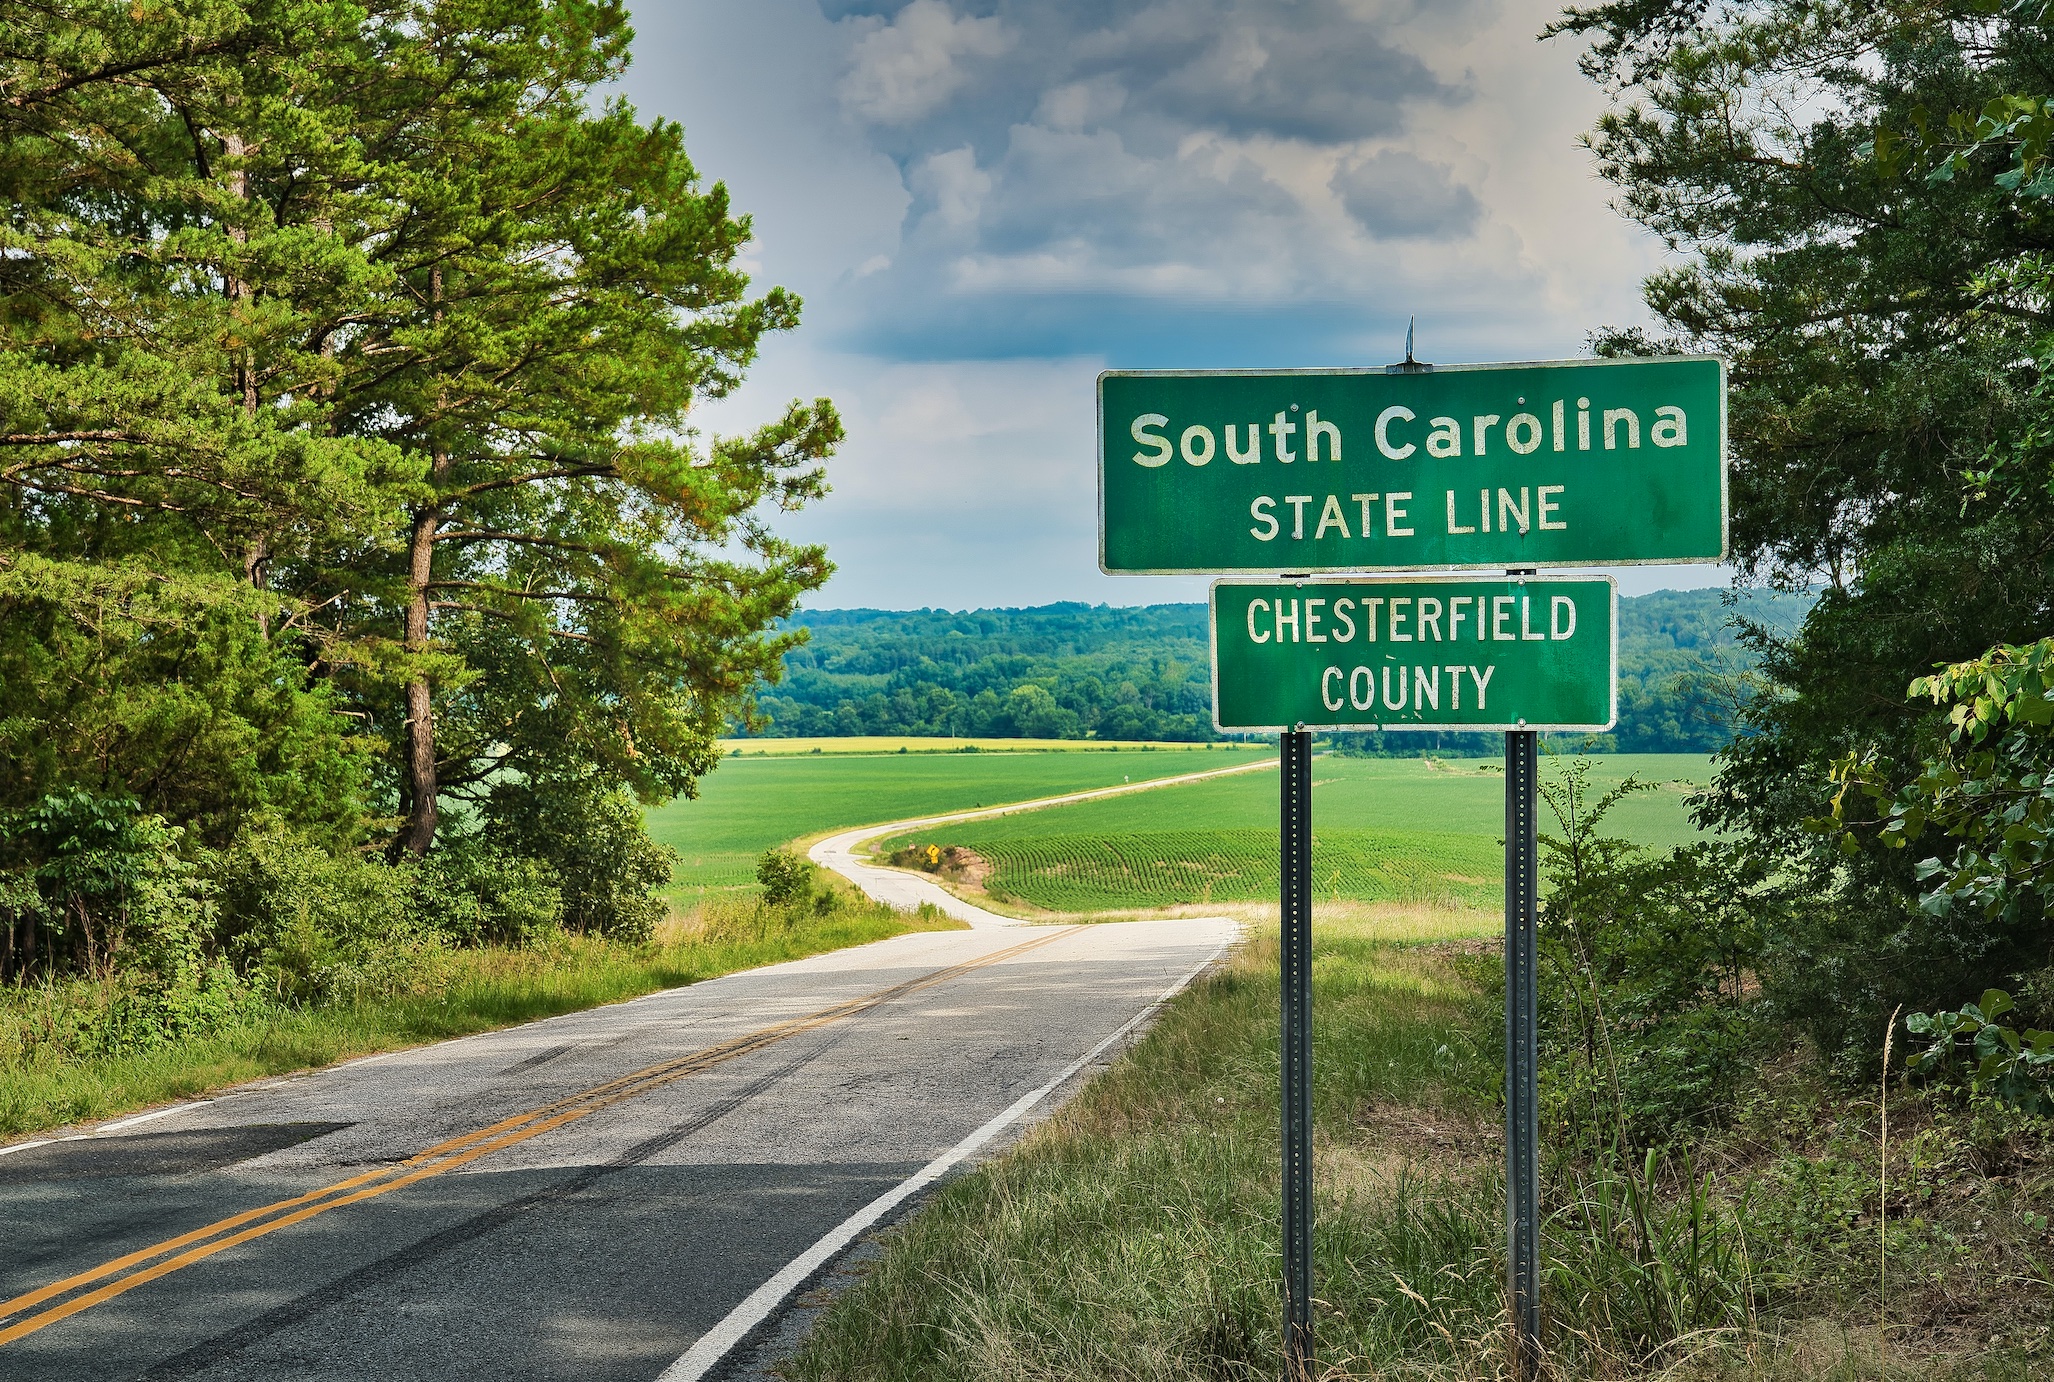 Road with sign saying, South Carolina State Line, Chesterfield County; image by Clint Patterson, via Unsplash.com.